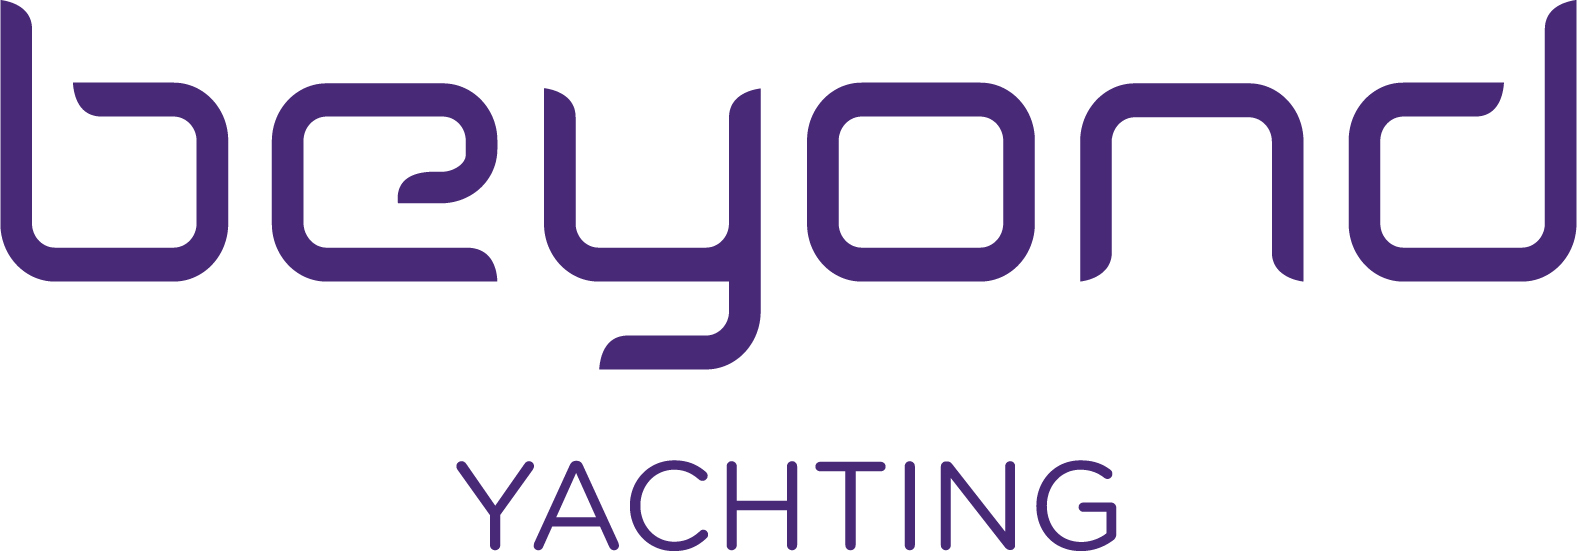 beyond Farbe Yachting